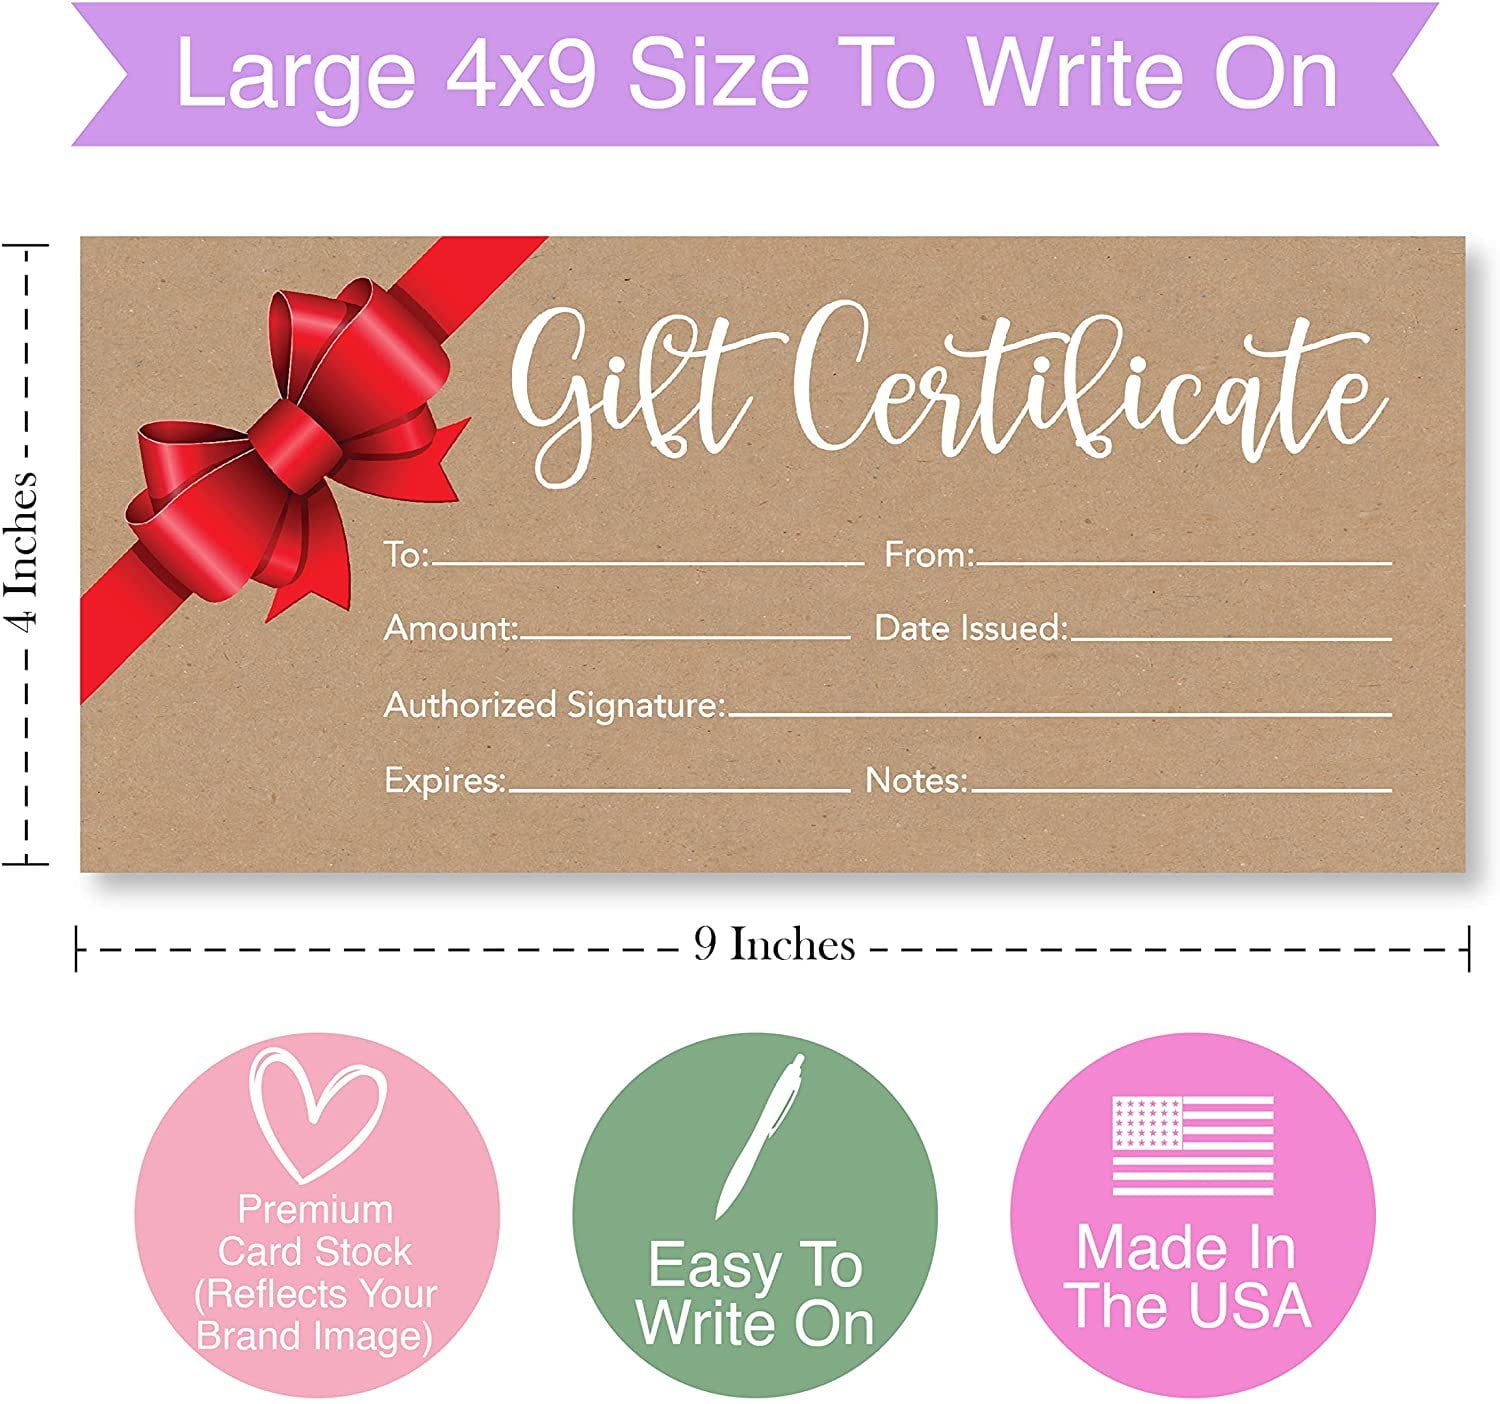 Paper Gift Certificates Blank Coupons 4X9 Inch 25 Generic Gift Certificates Holiday Gift Cards Blank Rustic Blank Gift Certificates for Business Supplies Blank Gift Cards for Spa Gift Vouchers 